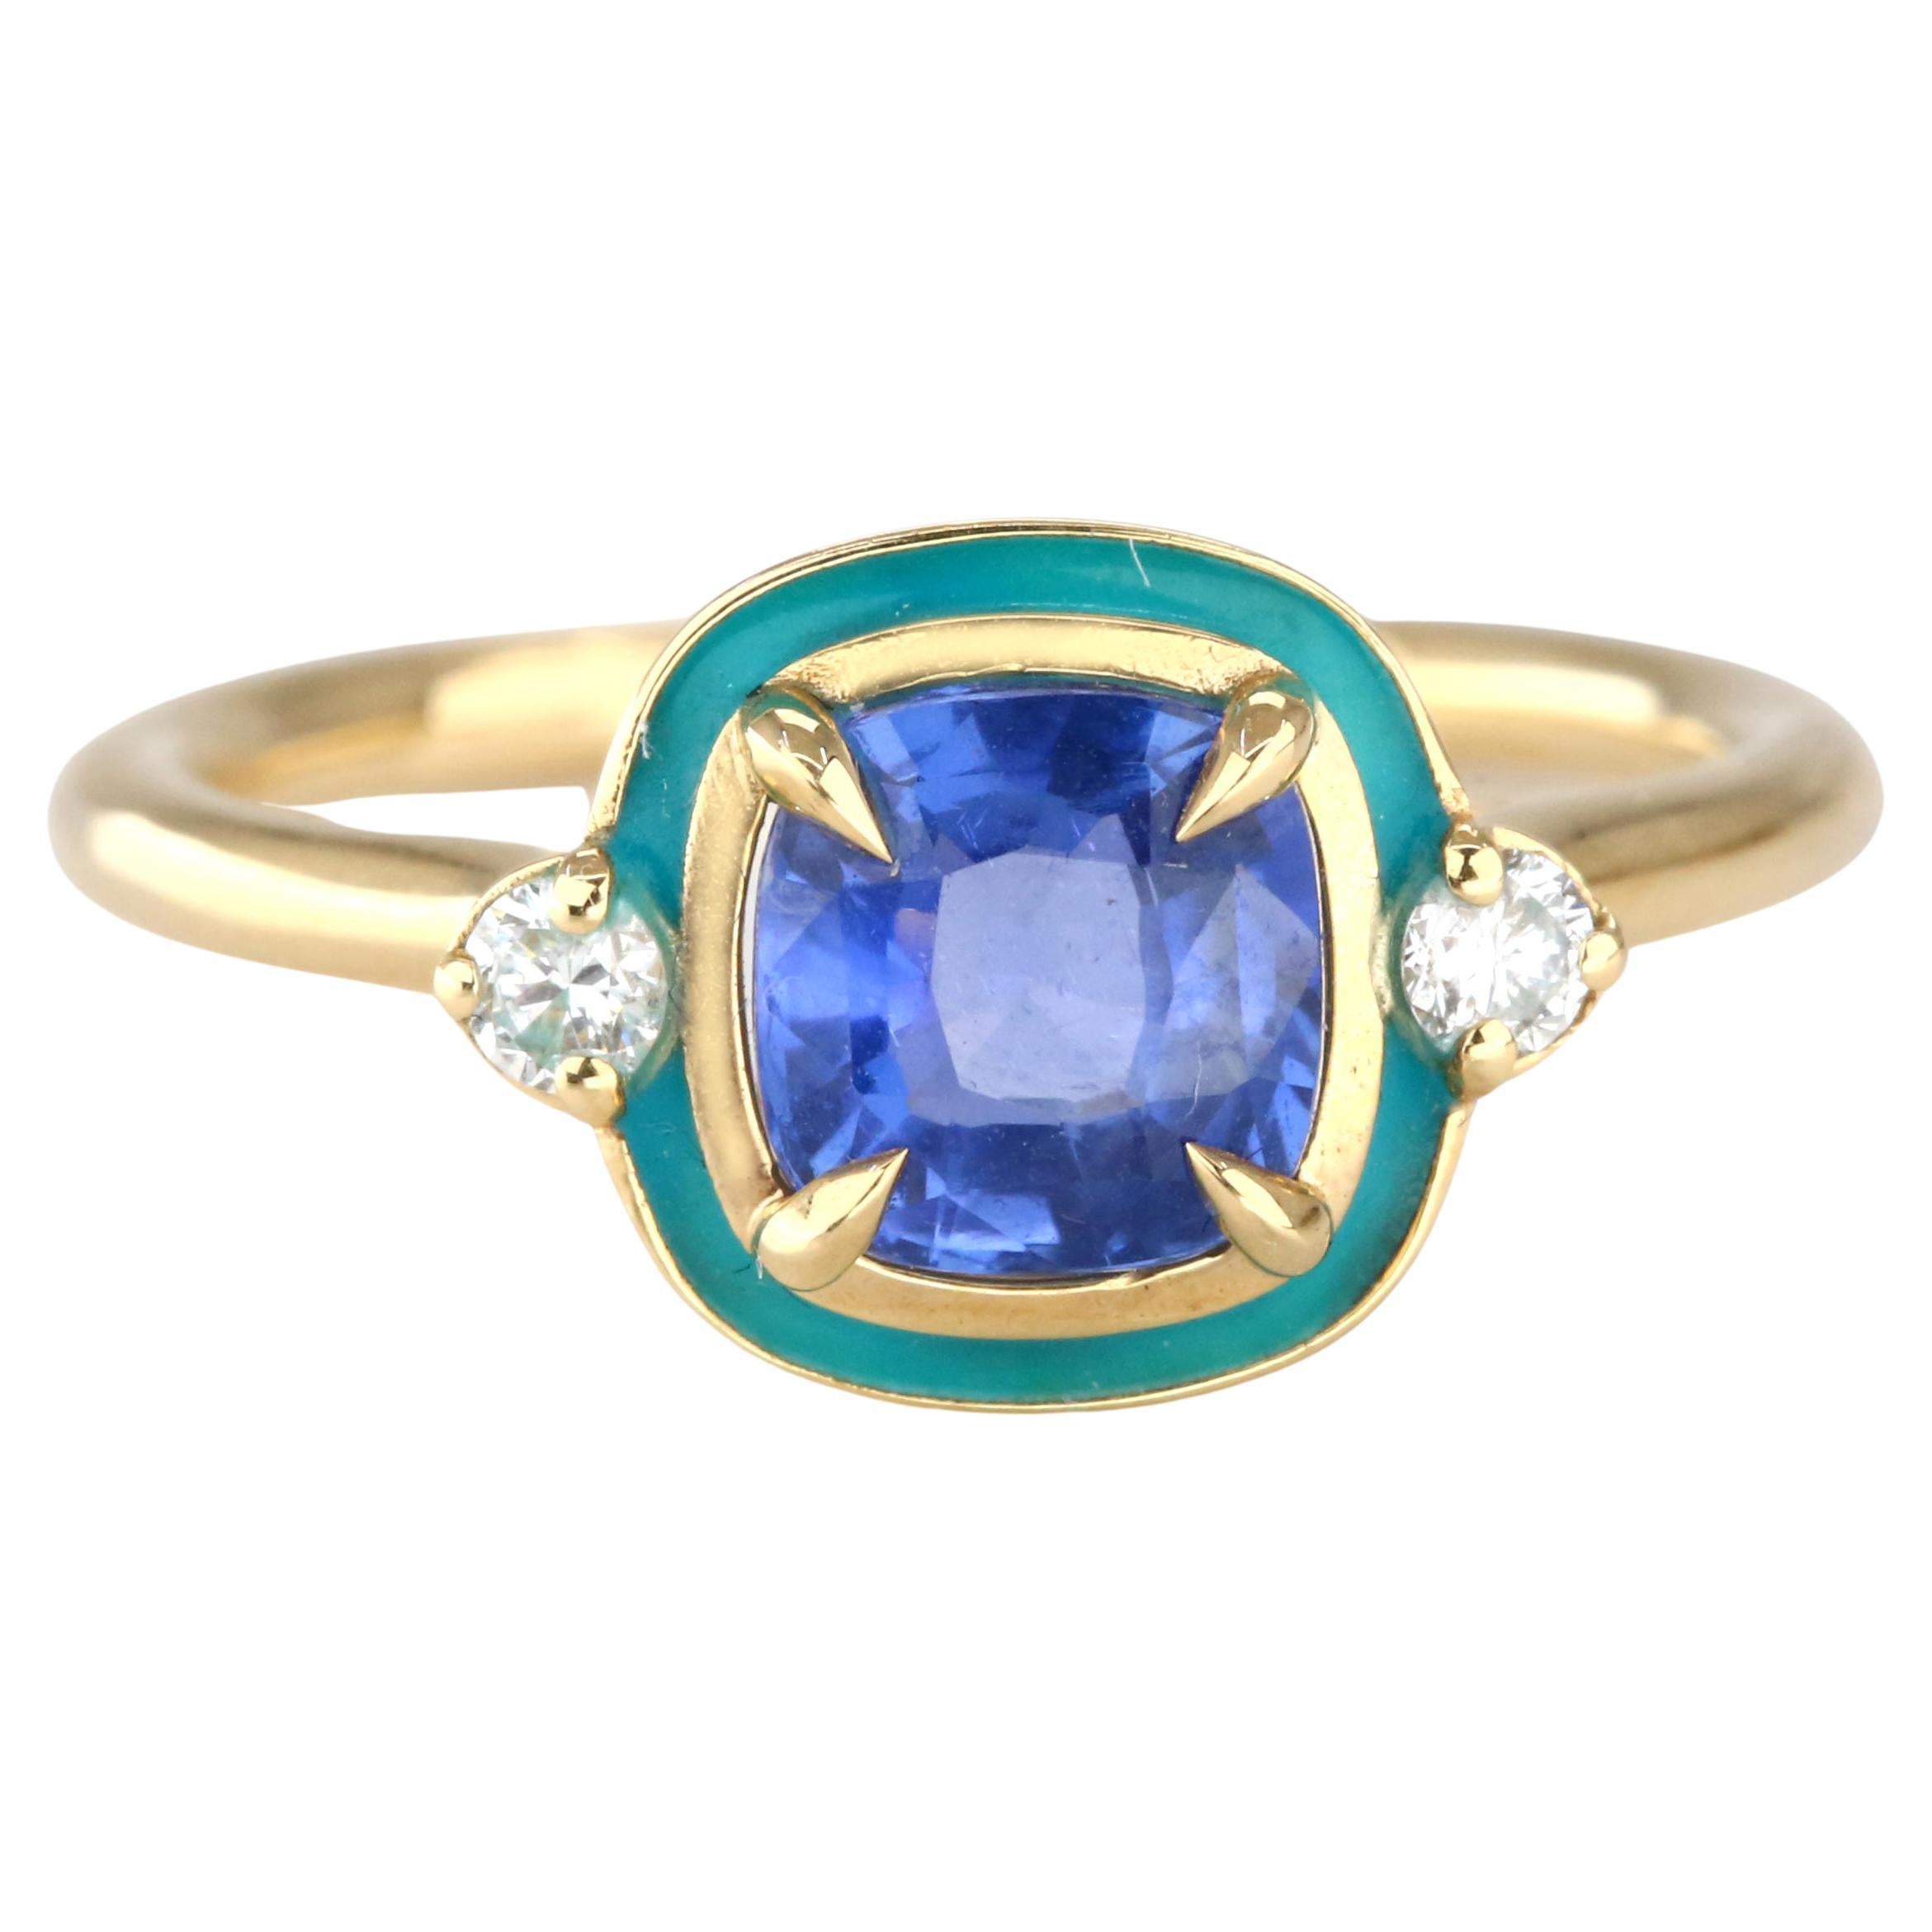 For Sale:  Art Deco Style 1.58 Ct. Ceylon Sapphire and Diamond 14K Gold Cocktail Ring